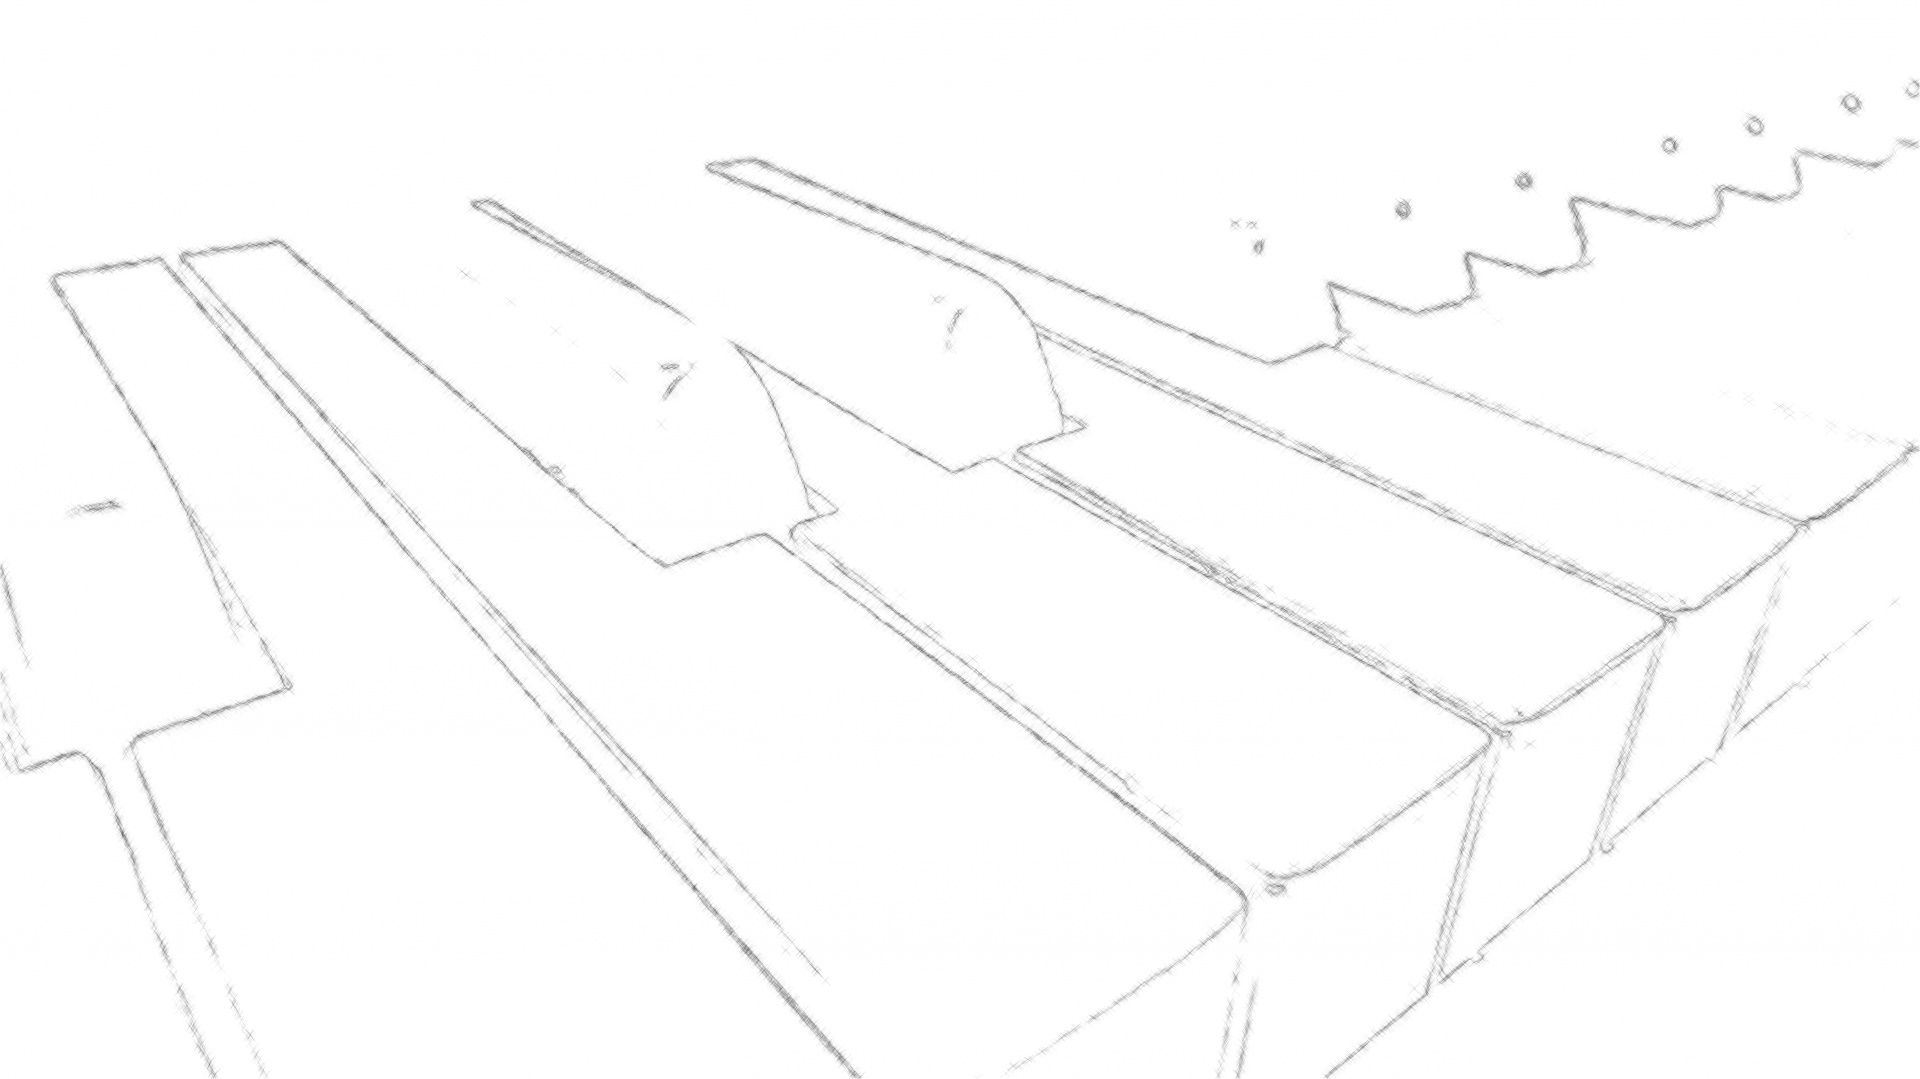 A piano keyboard captured at an angle with a sketch effect.